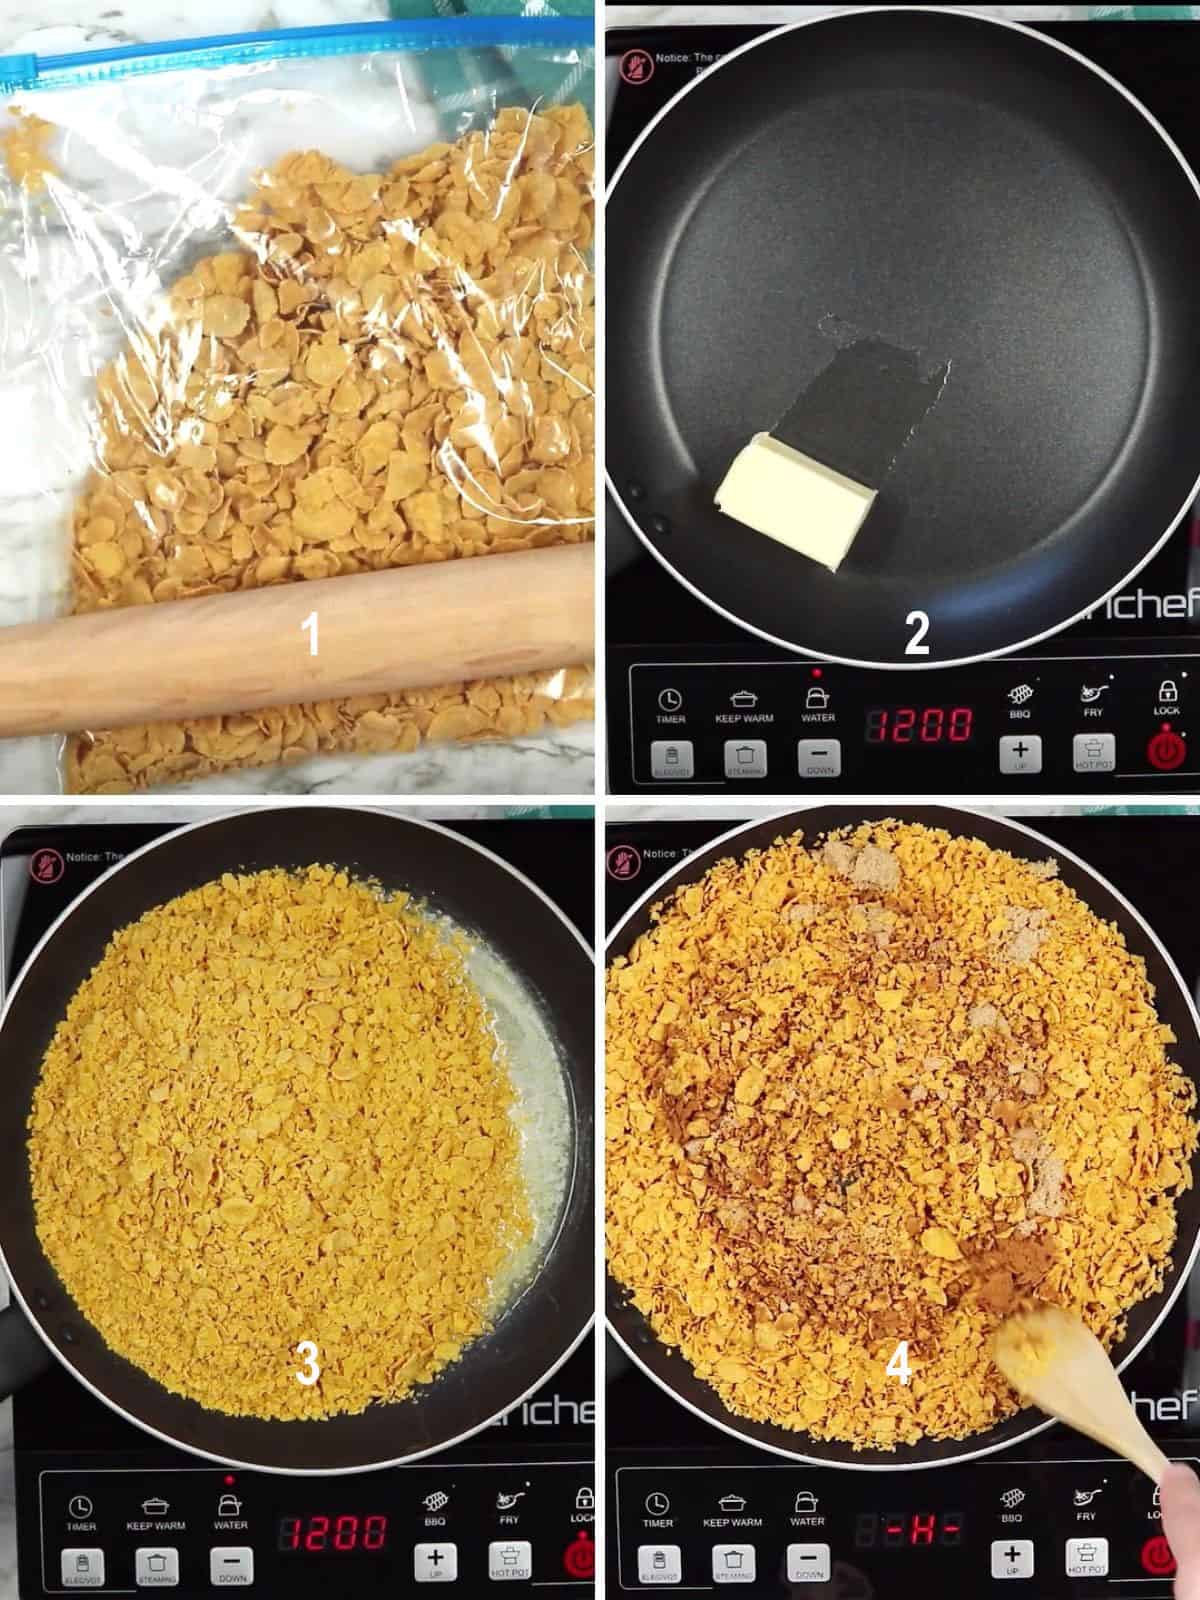 crushing corn flakes, butter in pan, cereal in pan with cinnamon and brown sugar